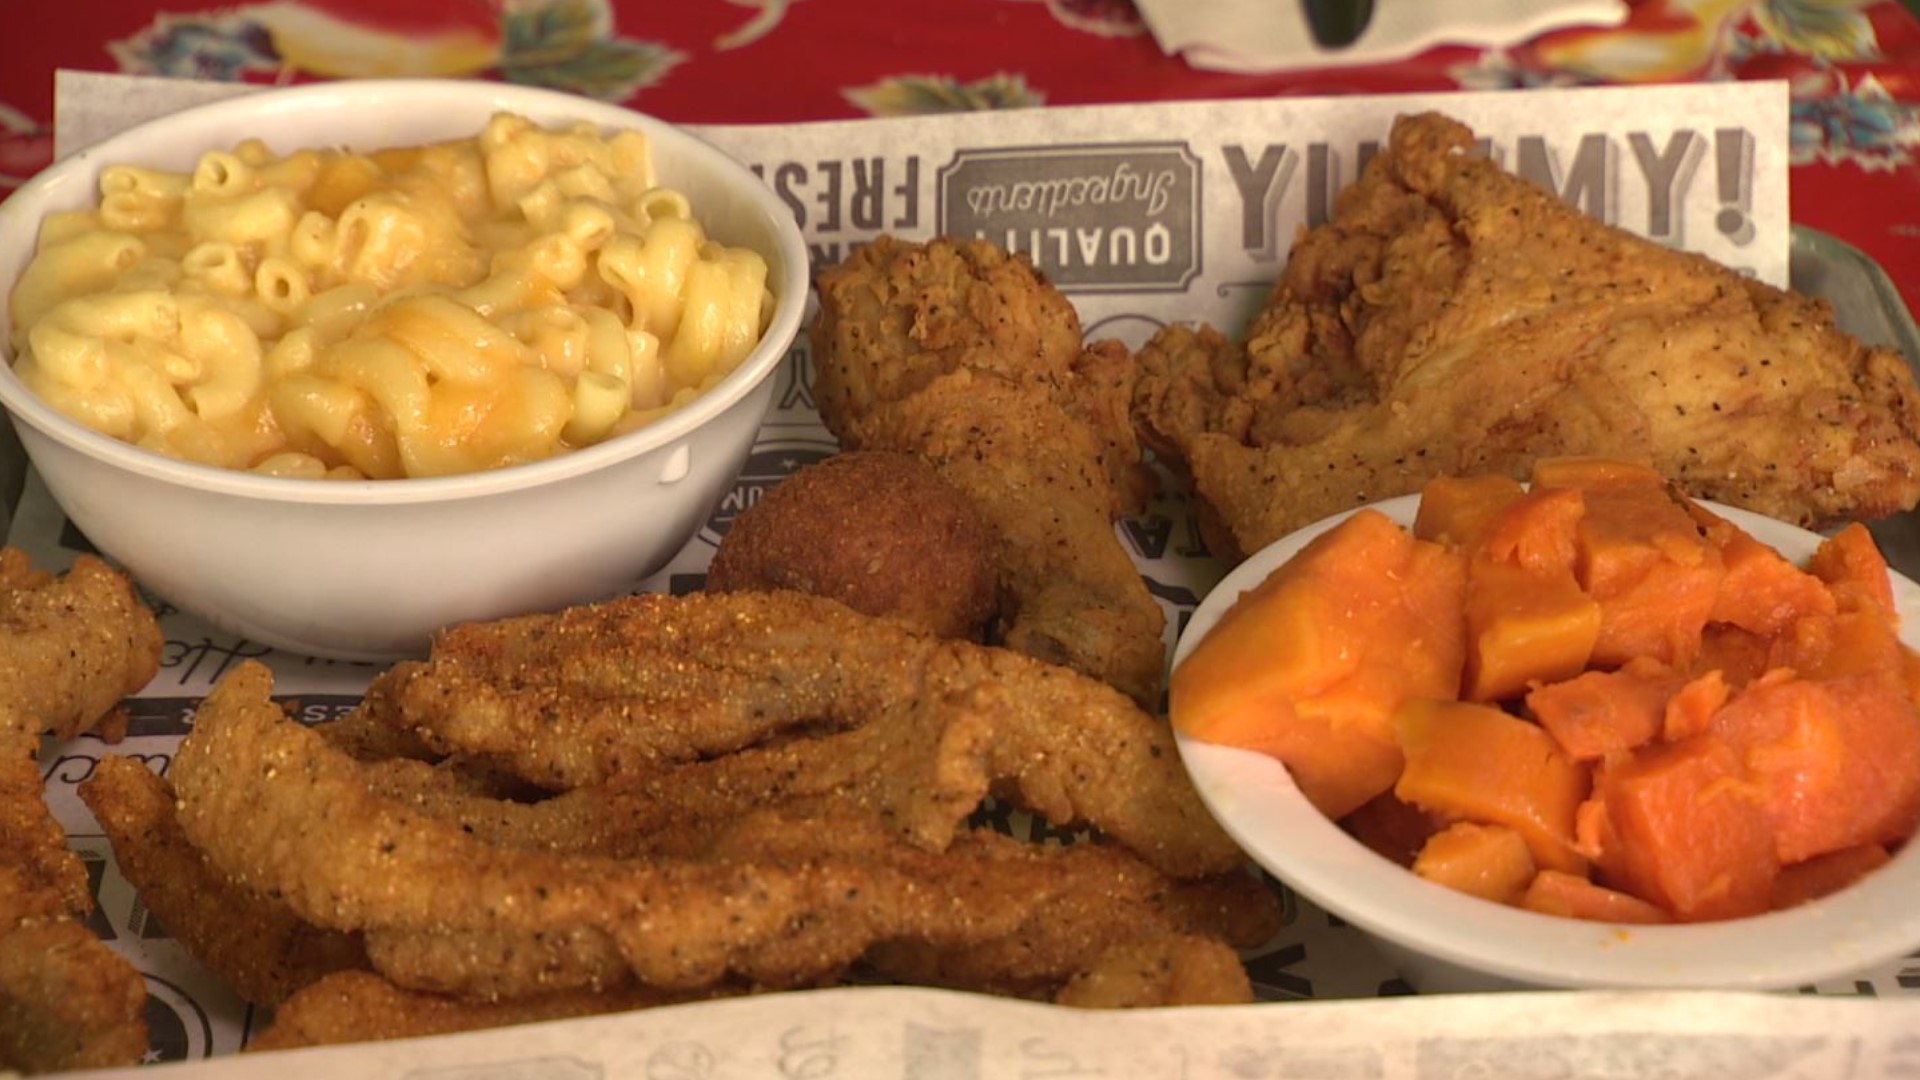 The Southern Fried Chicken is the star of the show. #k5evening